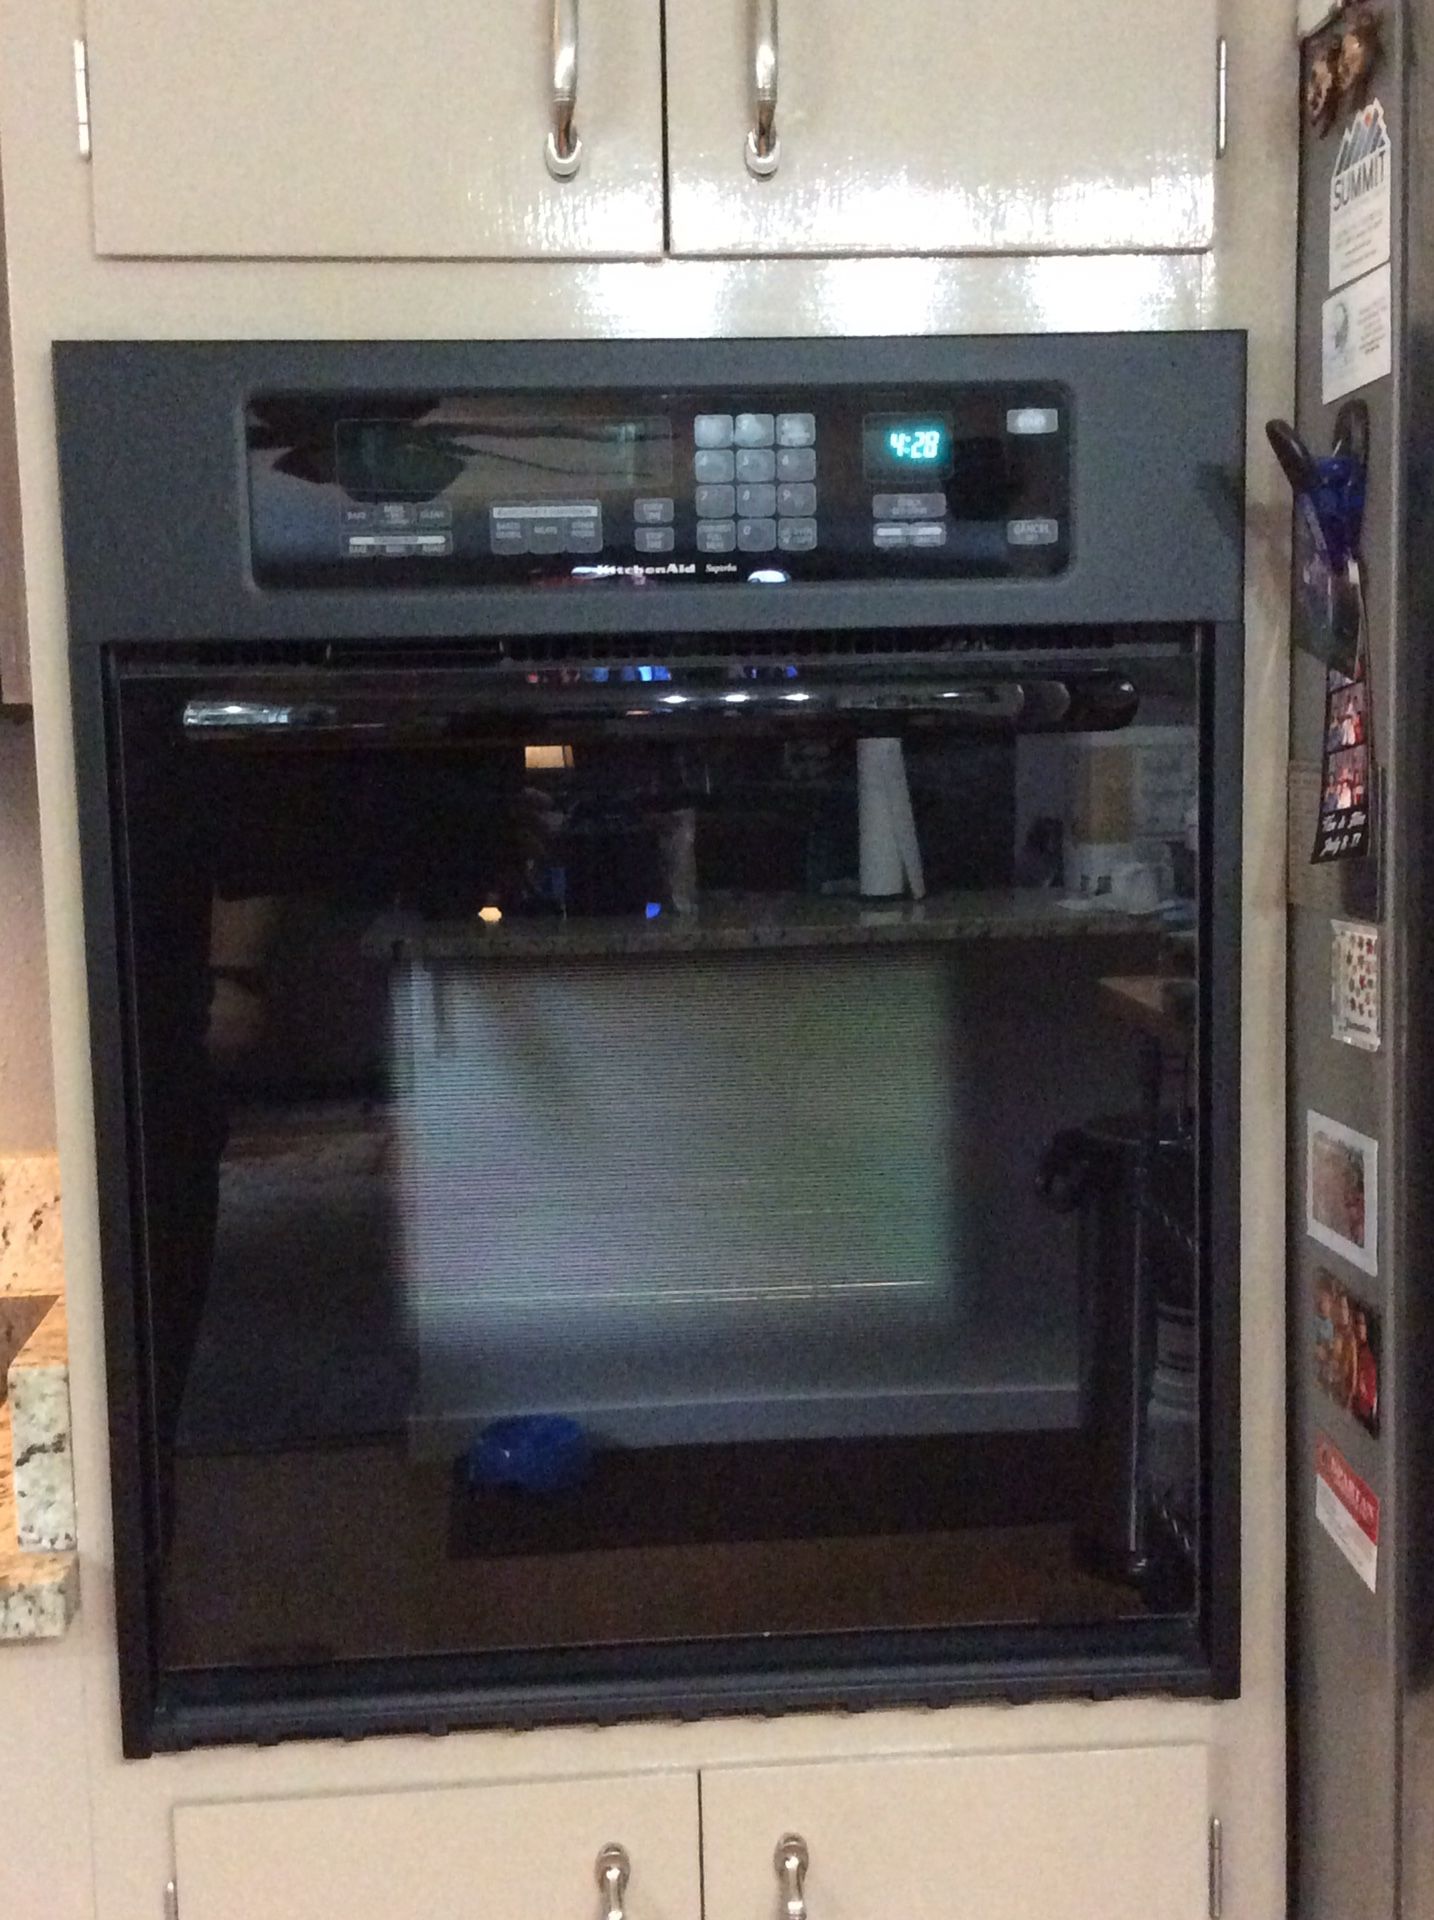 KitchenAid 24” Built-In Electric Convection Oven